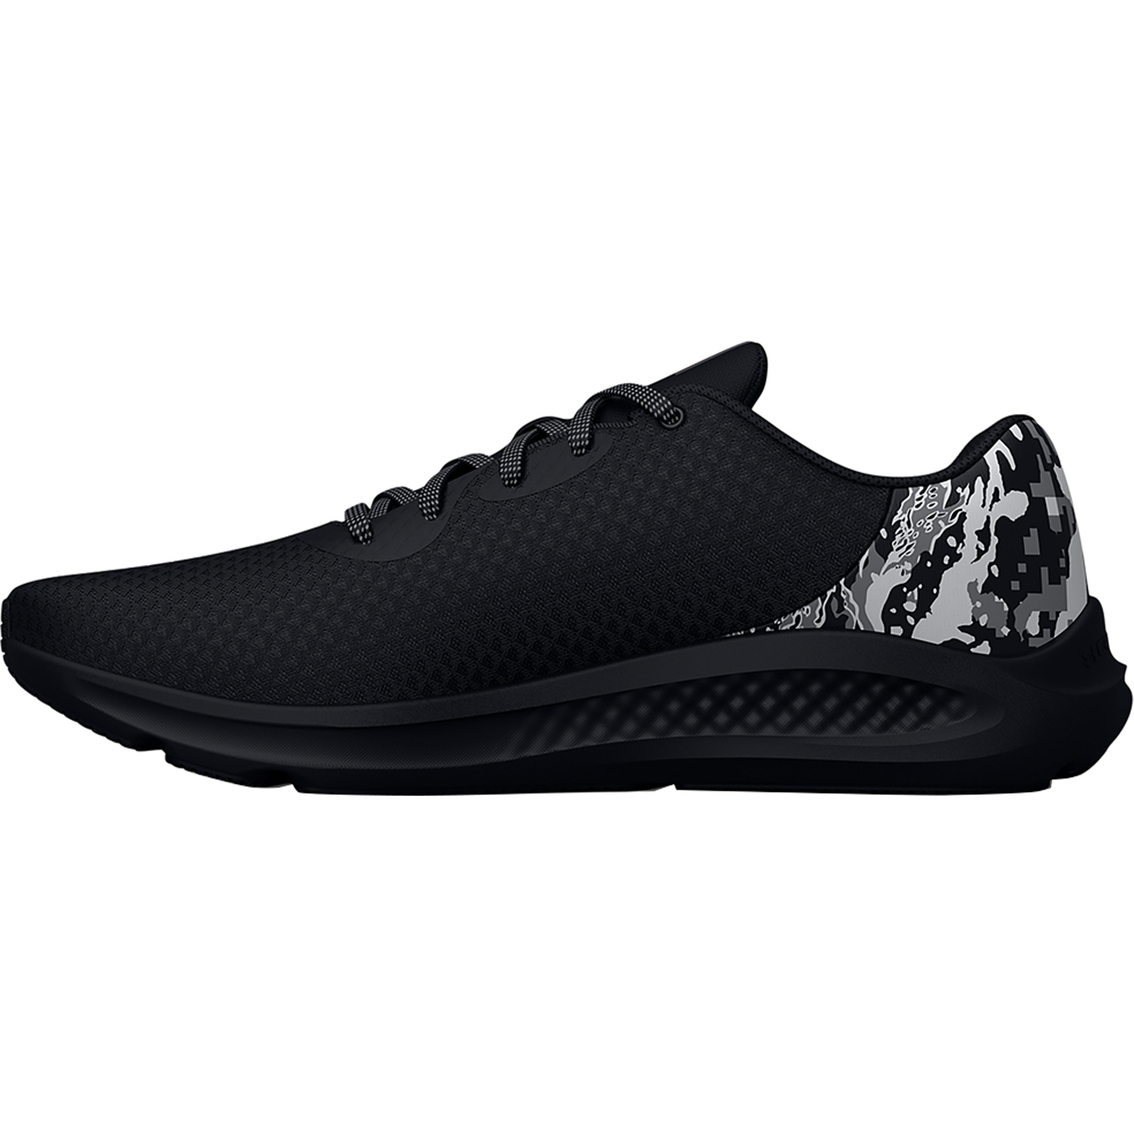 Under Armour Men's Charged Pursuit 3 Freedom Running Shoes - Image 3 of 5